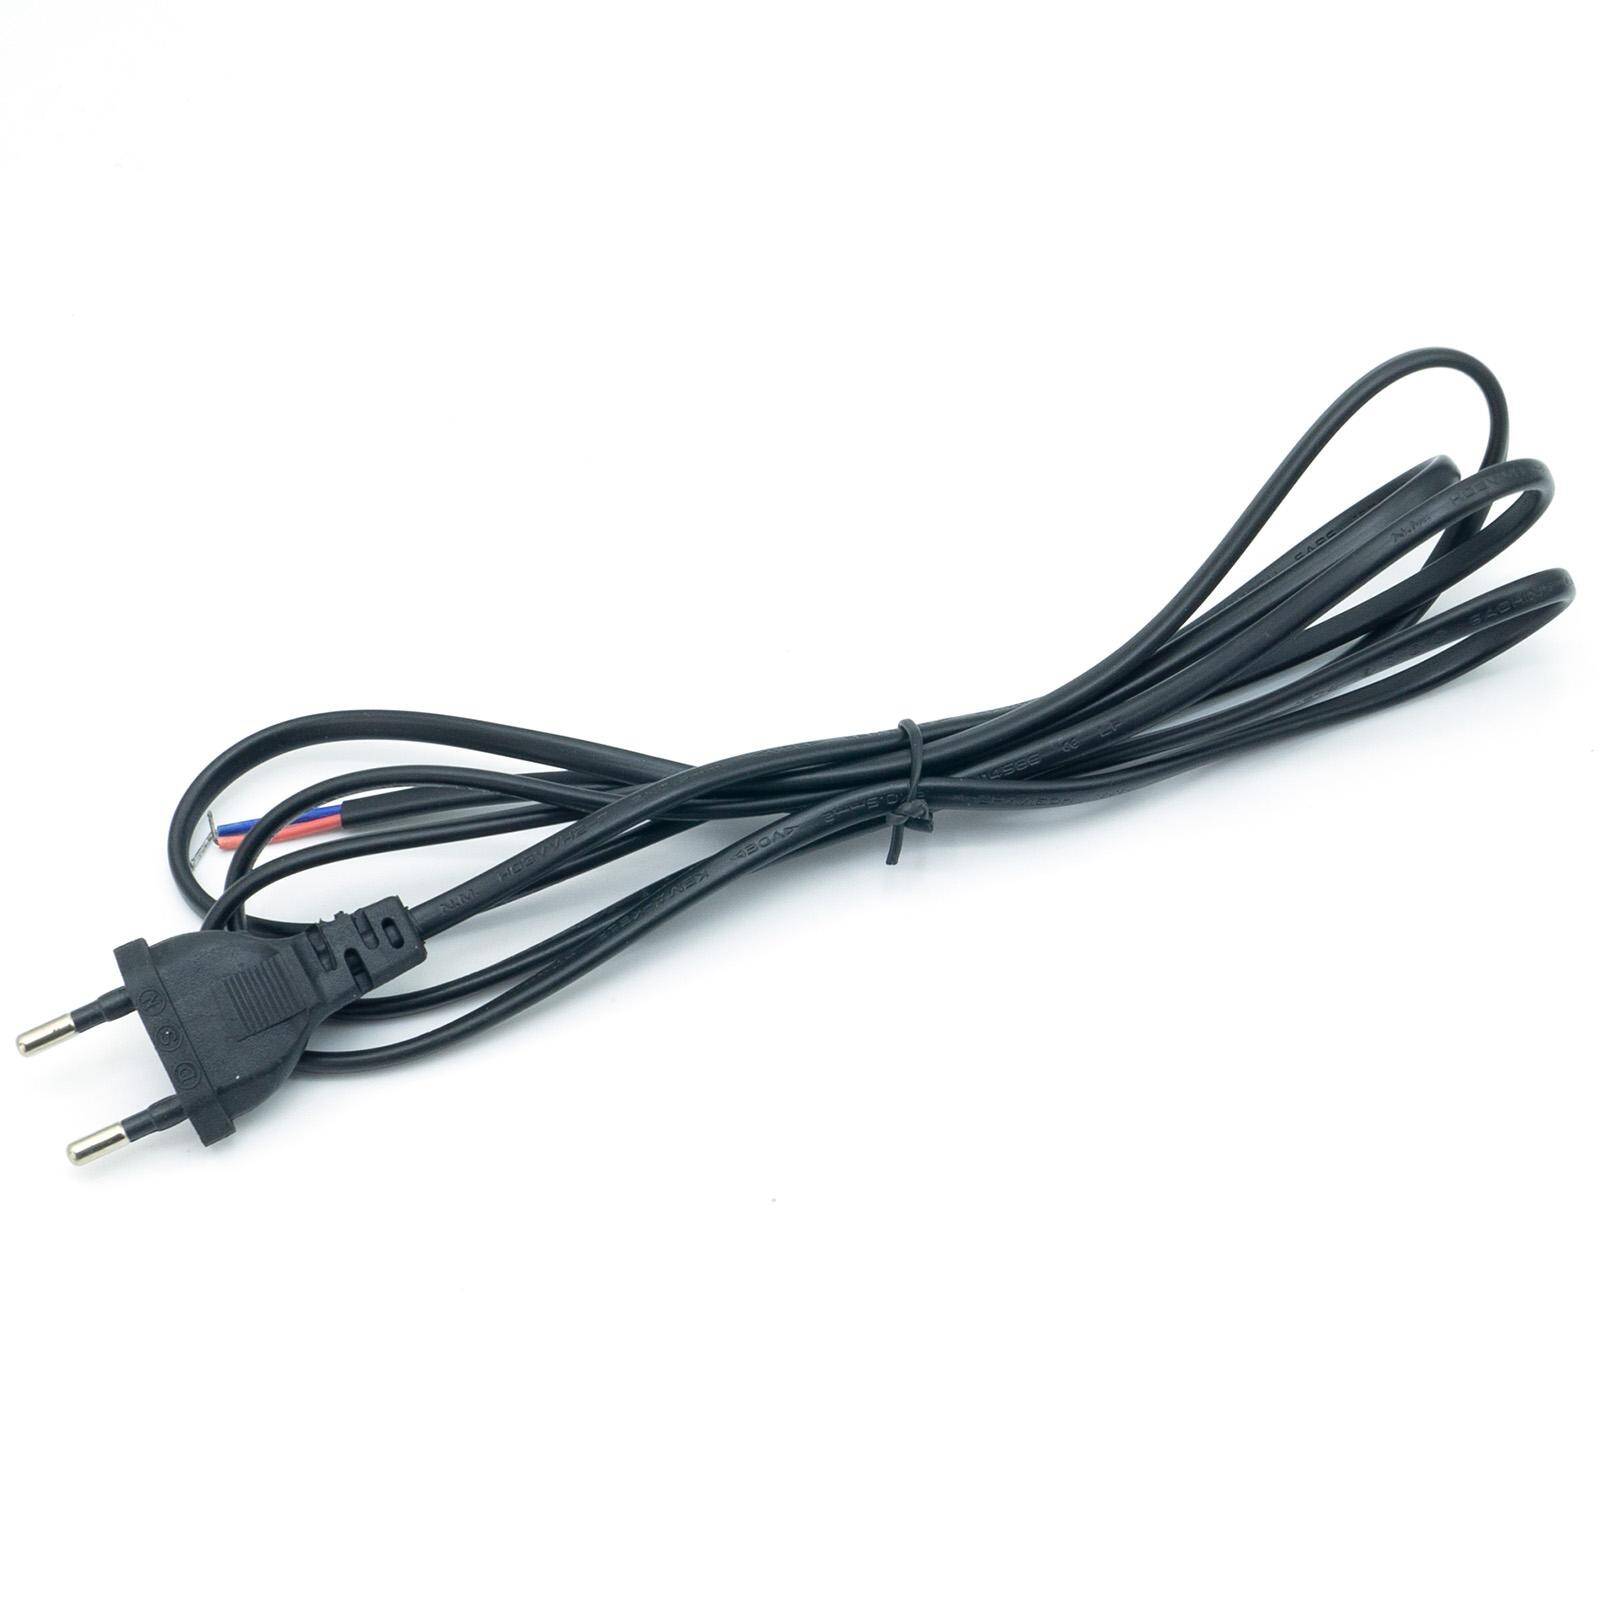 Black 2m cable with 2x0.5 plug